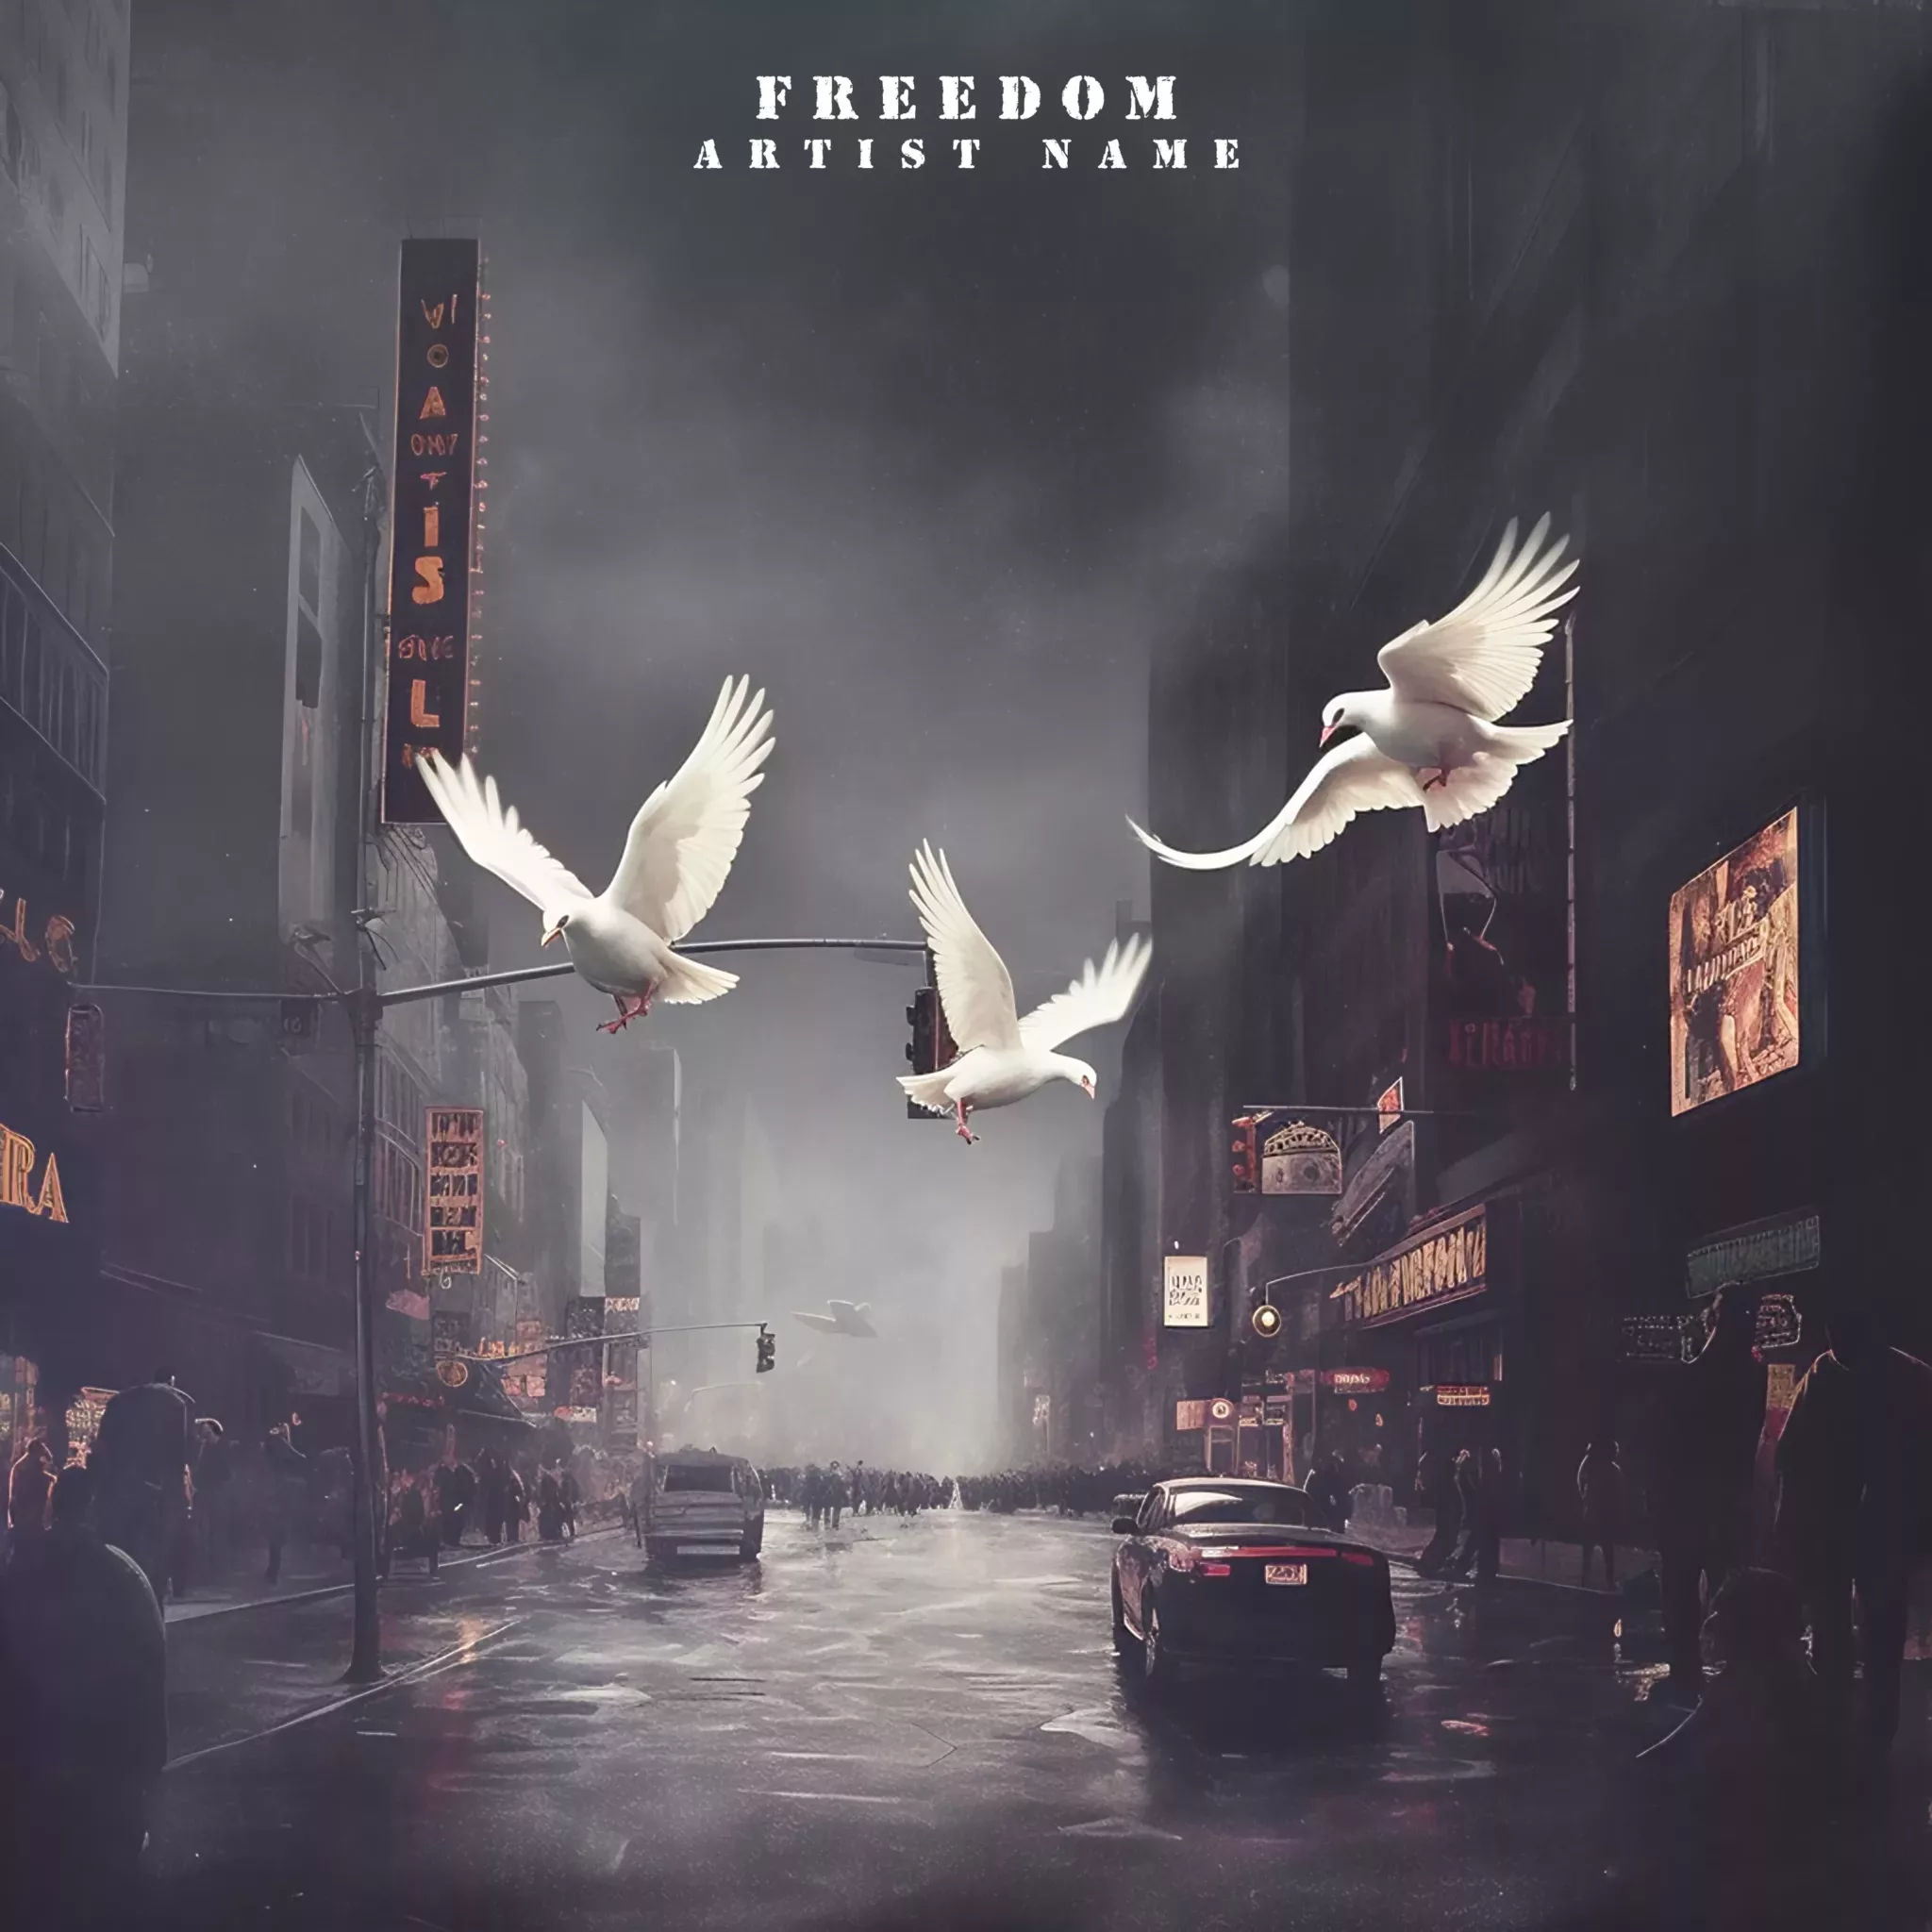 Freedom cover art for sale